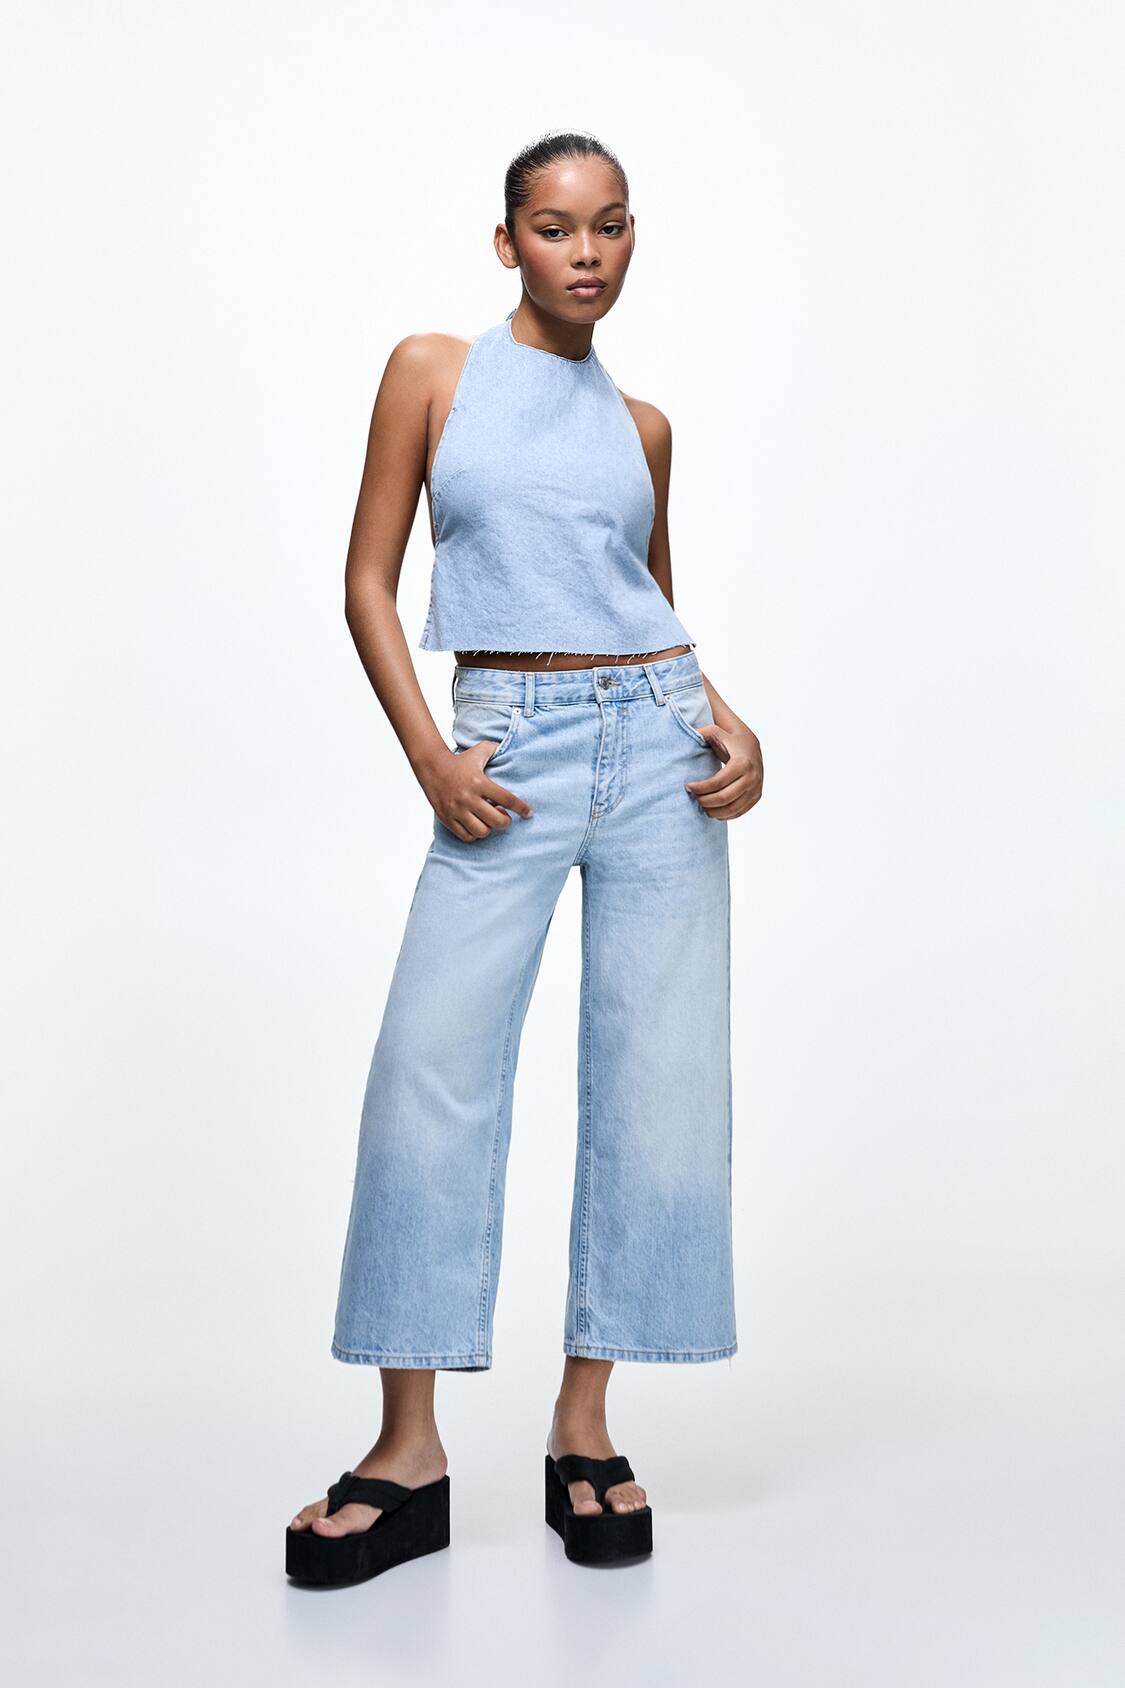 Evening Soirees with Denim Culottes